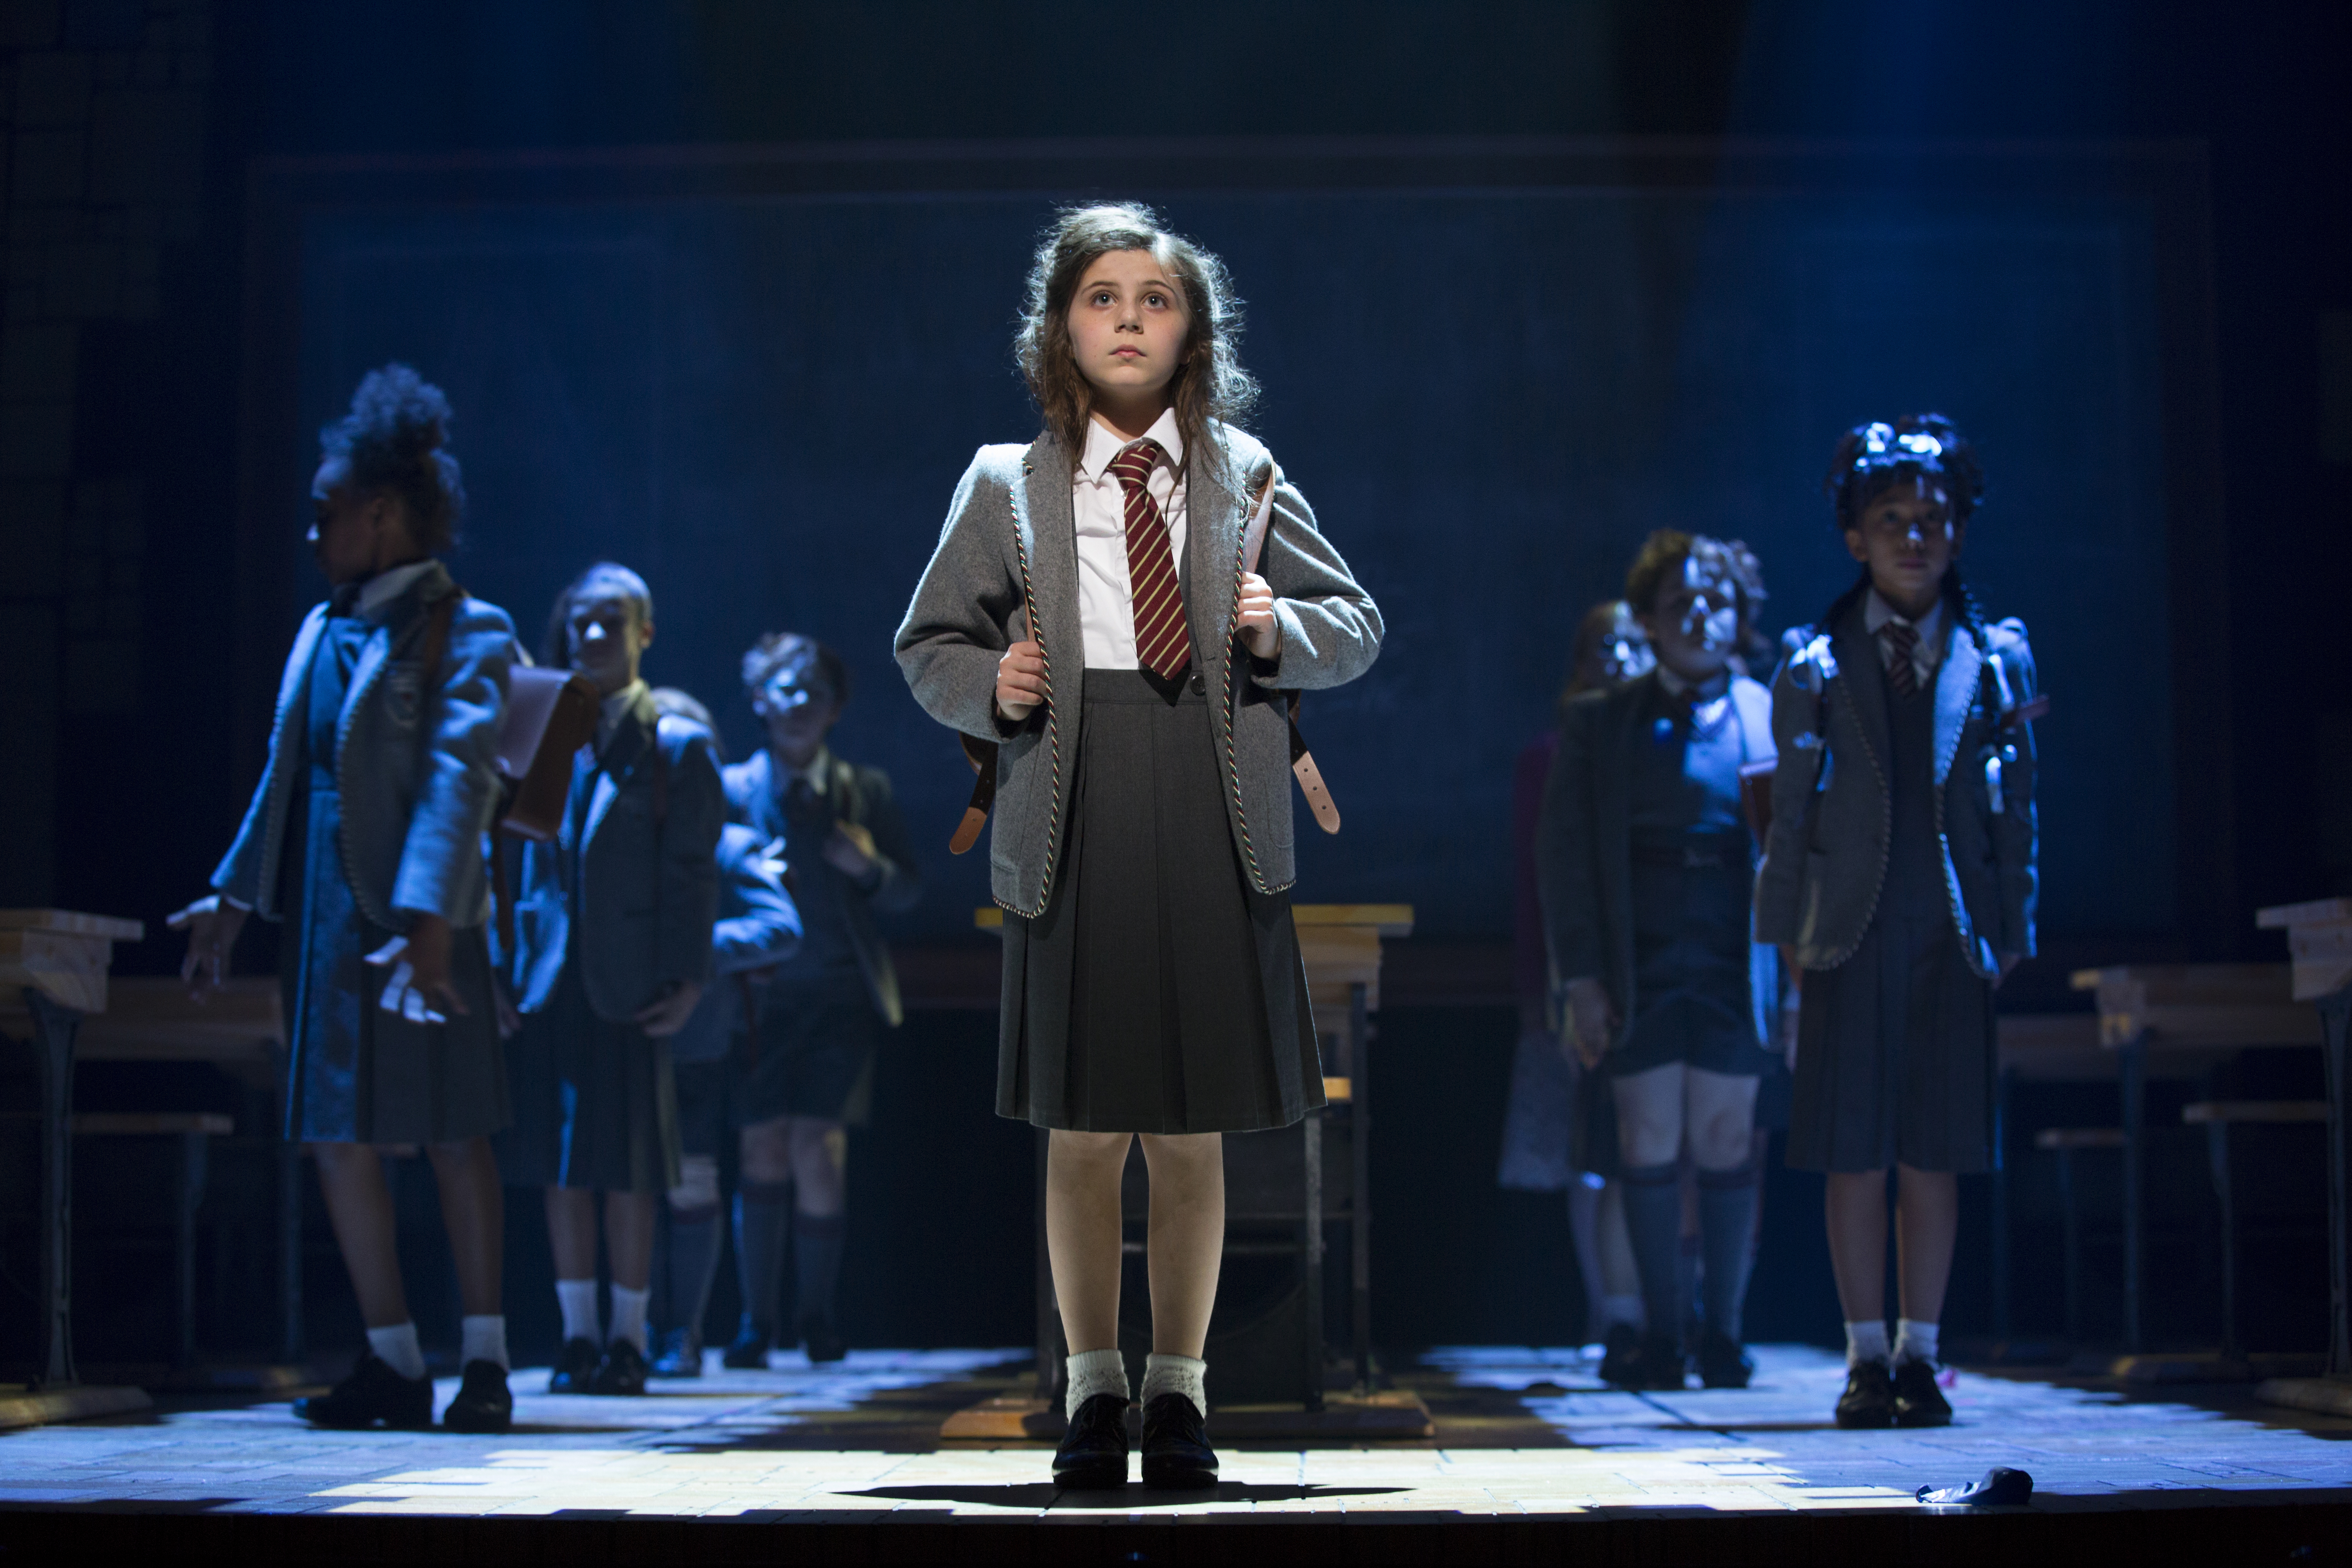 MATILDA THE MUSICAL Runs March 22-April 10 at The Oriental Theatre 4 Broadway In Chicago and The SpongeBob Musical are thrilled to announce Yolanda Adams, Sara Bareilles and Alex Ebert of Edward Sharpe & The Magnetic Zeros will contribute original songs to the show.